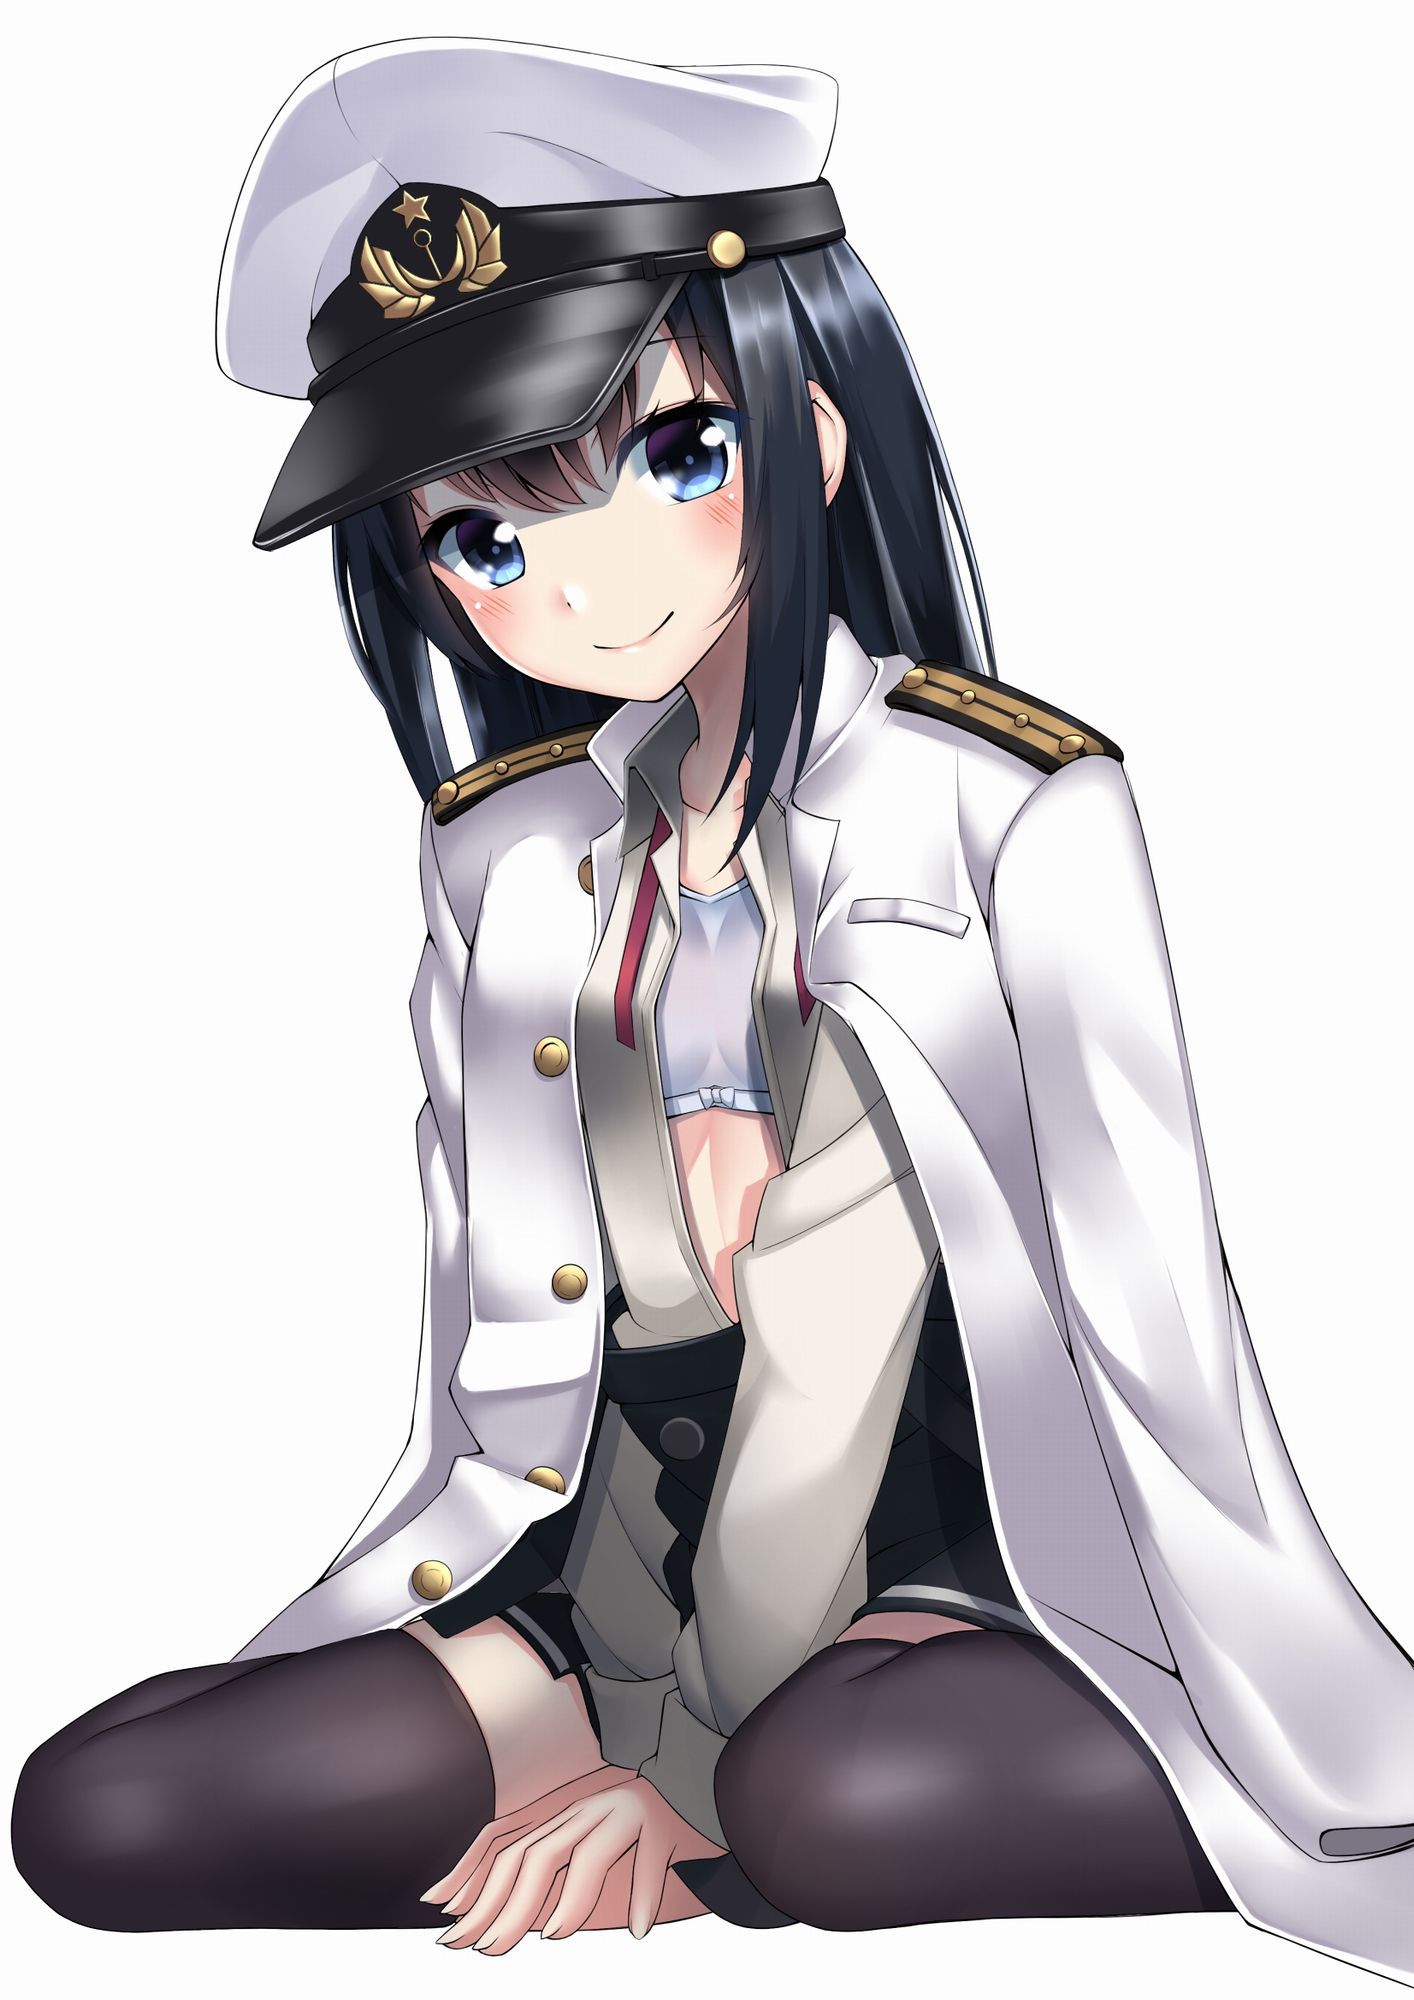 [Secondary, ZIP] pretty serious ship it together images of asashio 100 62